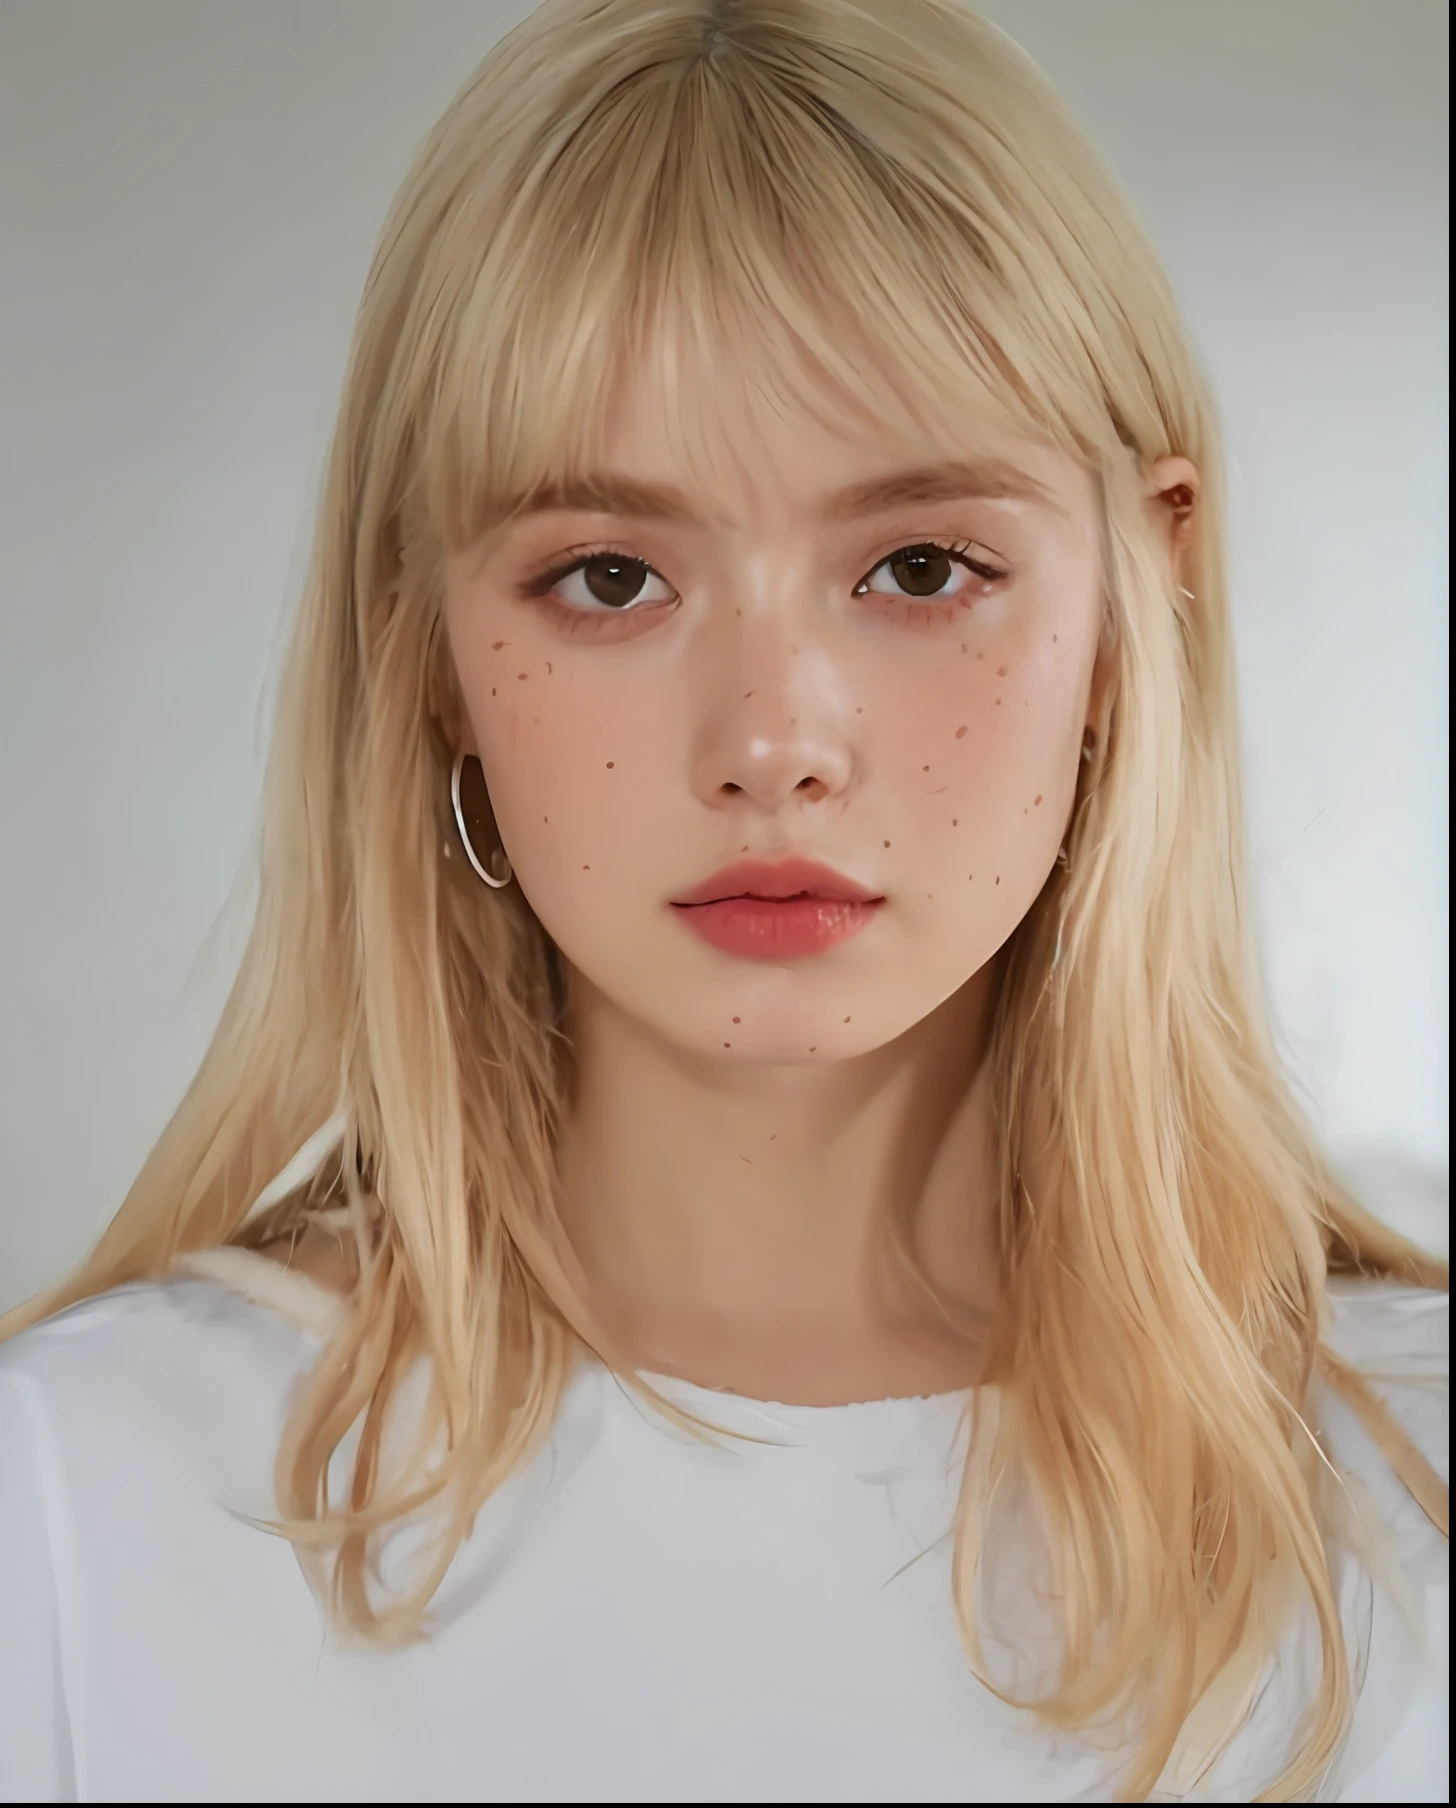 Blonde girl with freckles and piercings looking at the camera, pale round face, light freckles, white fringe, white freckles, one with blonde hair, rosy cheeks with freckles, white fringe, neat hair with bangs, light cute freckles, soft freckles, very light freckles, looks like a mix of grimes, She looks like a mix of Grimes, Elle Fanning)